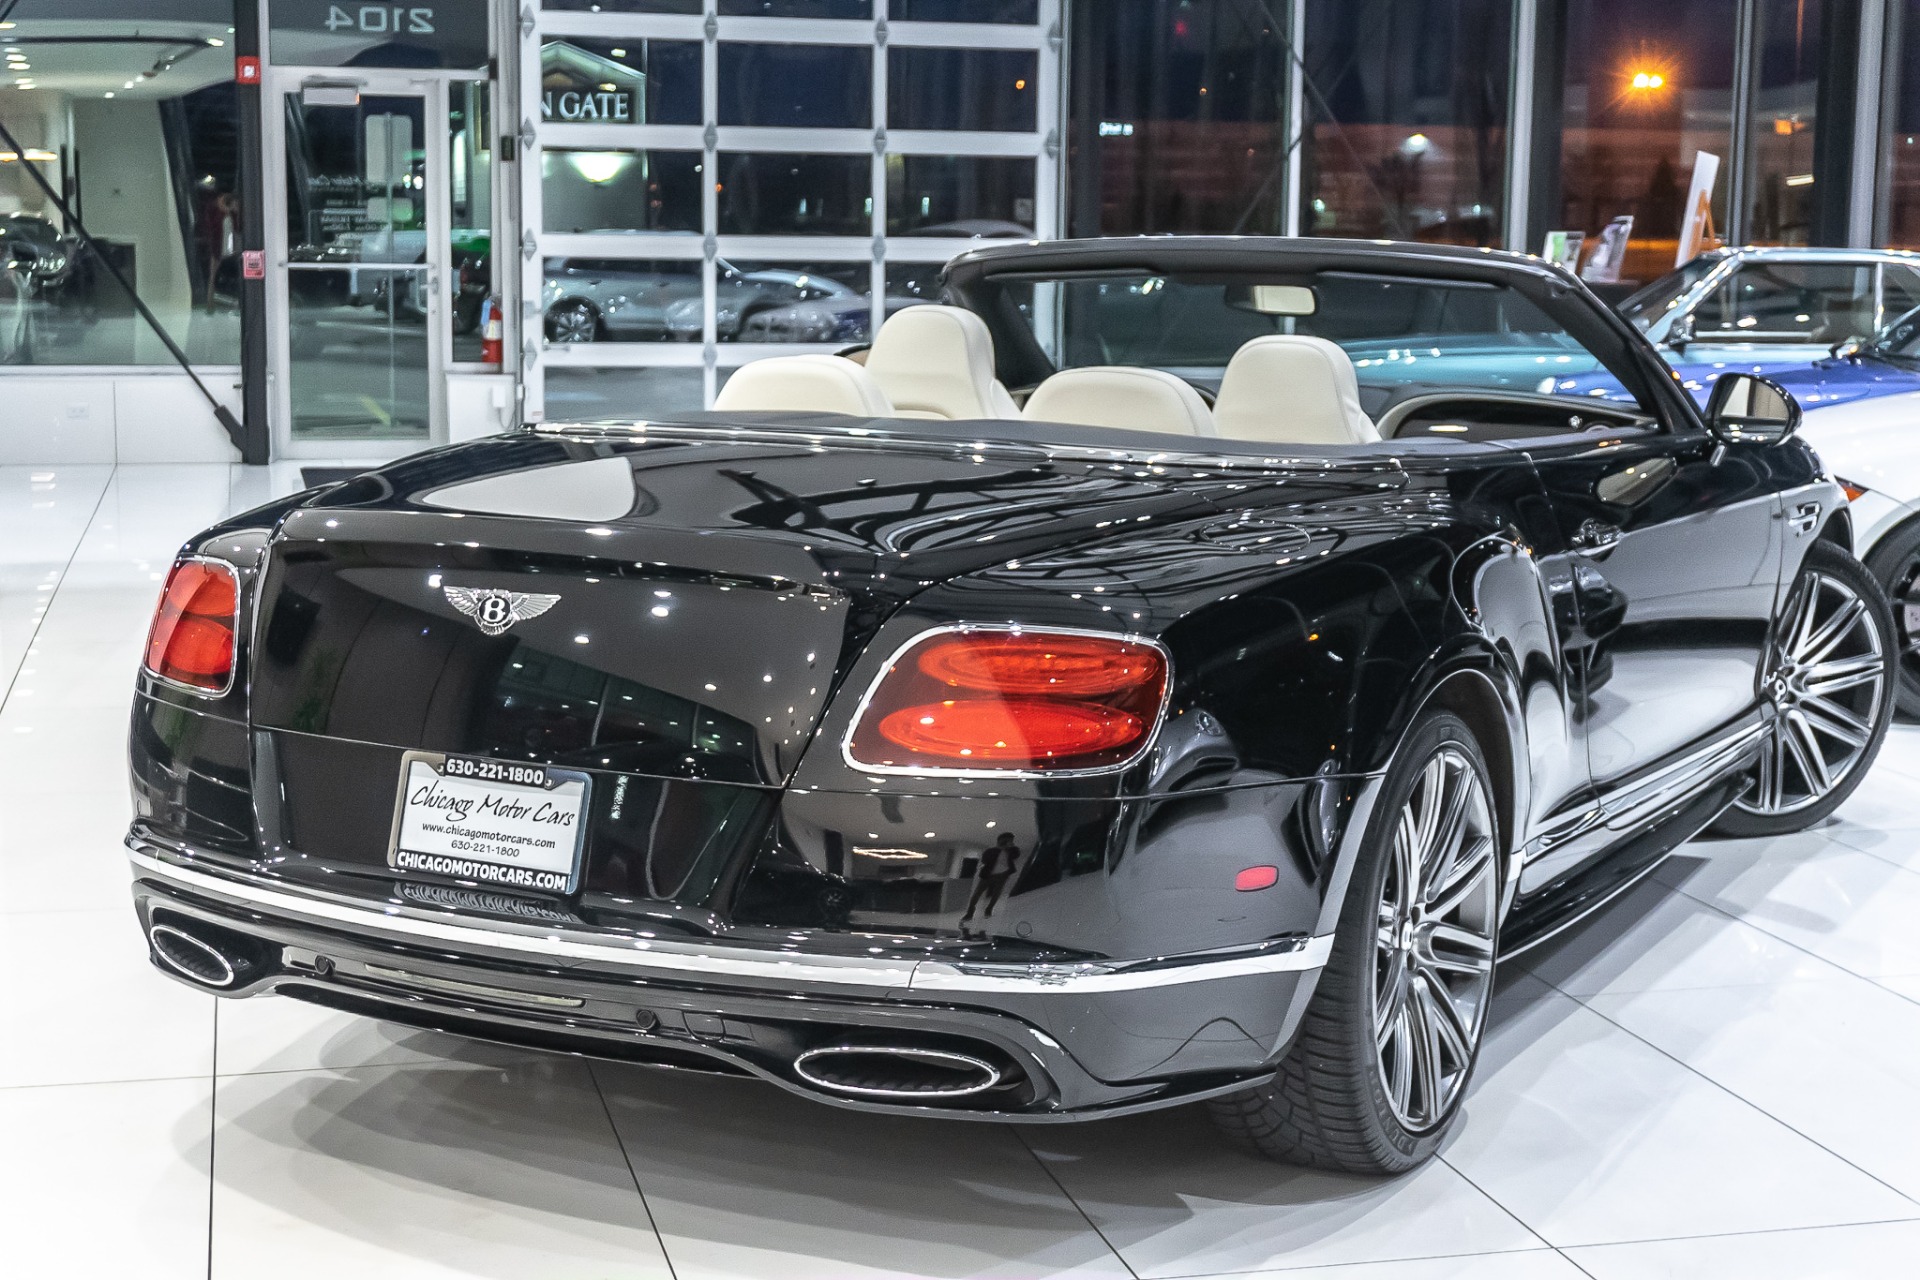 Used-2016-Bentley-Continental-GTC-Speed-Convertible-MSRP-280k